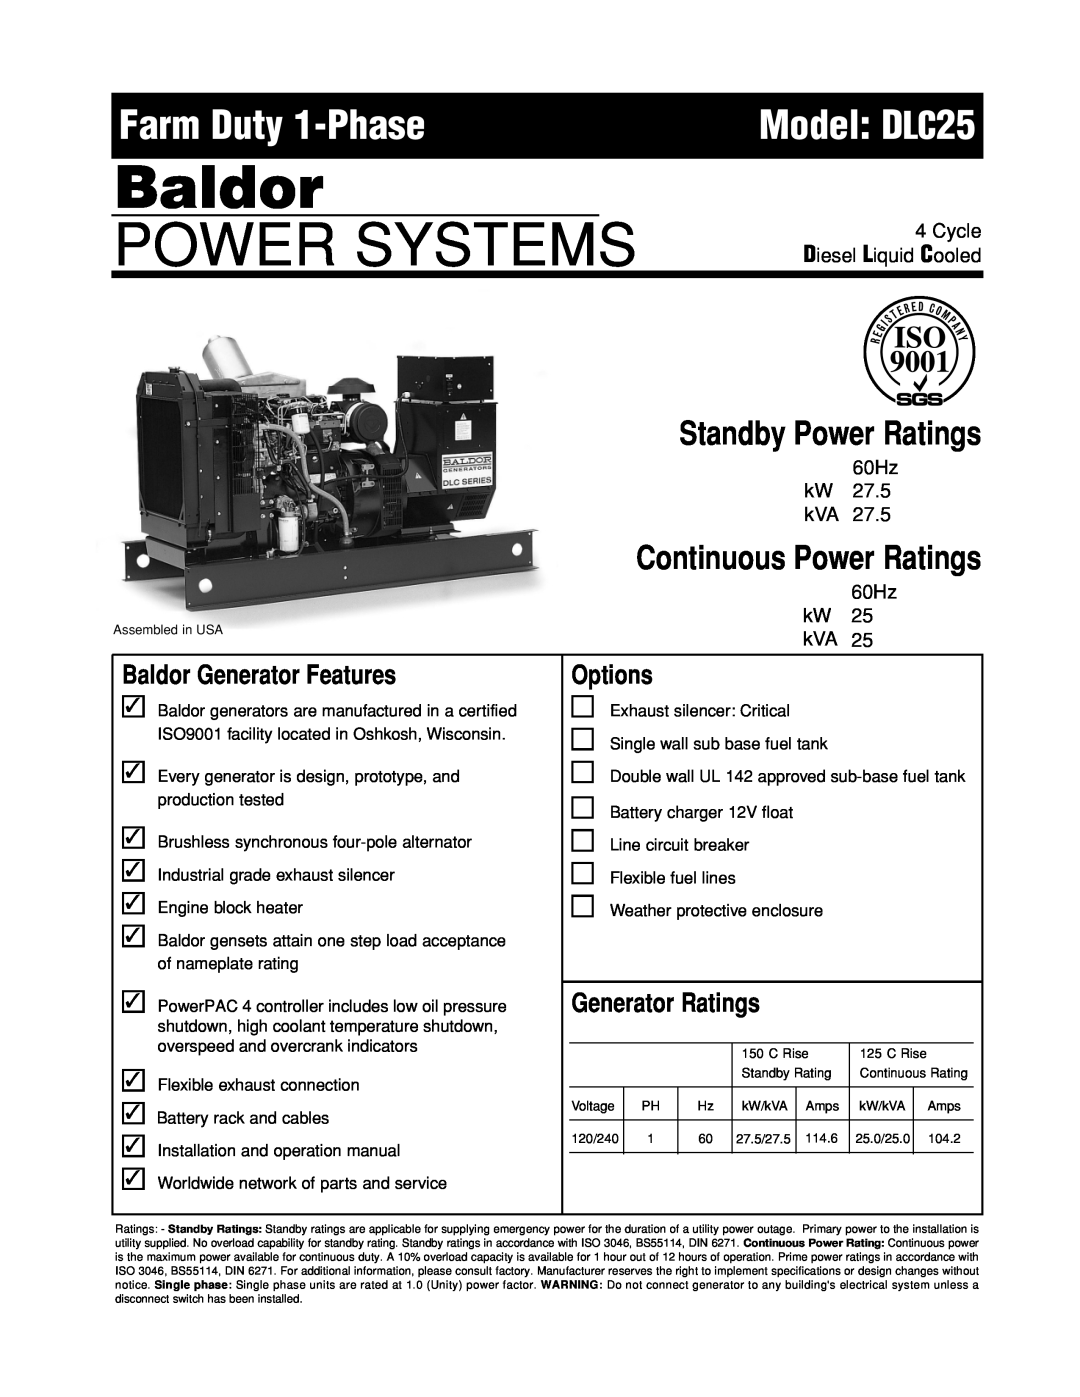 Baldor ISO9001 Baldor, Power Systems, Farm Duty 1-Phase, Model DLC25, Standby Power Ratings, Continuous Power Ratings 